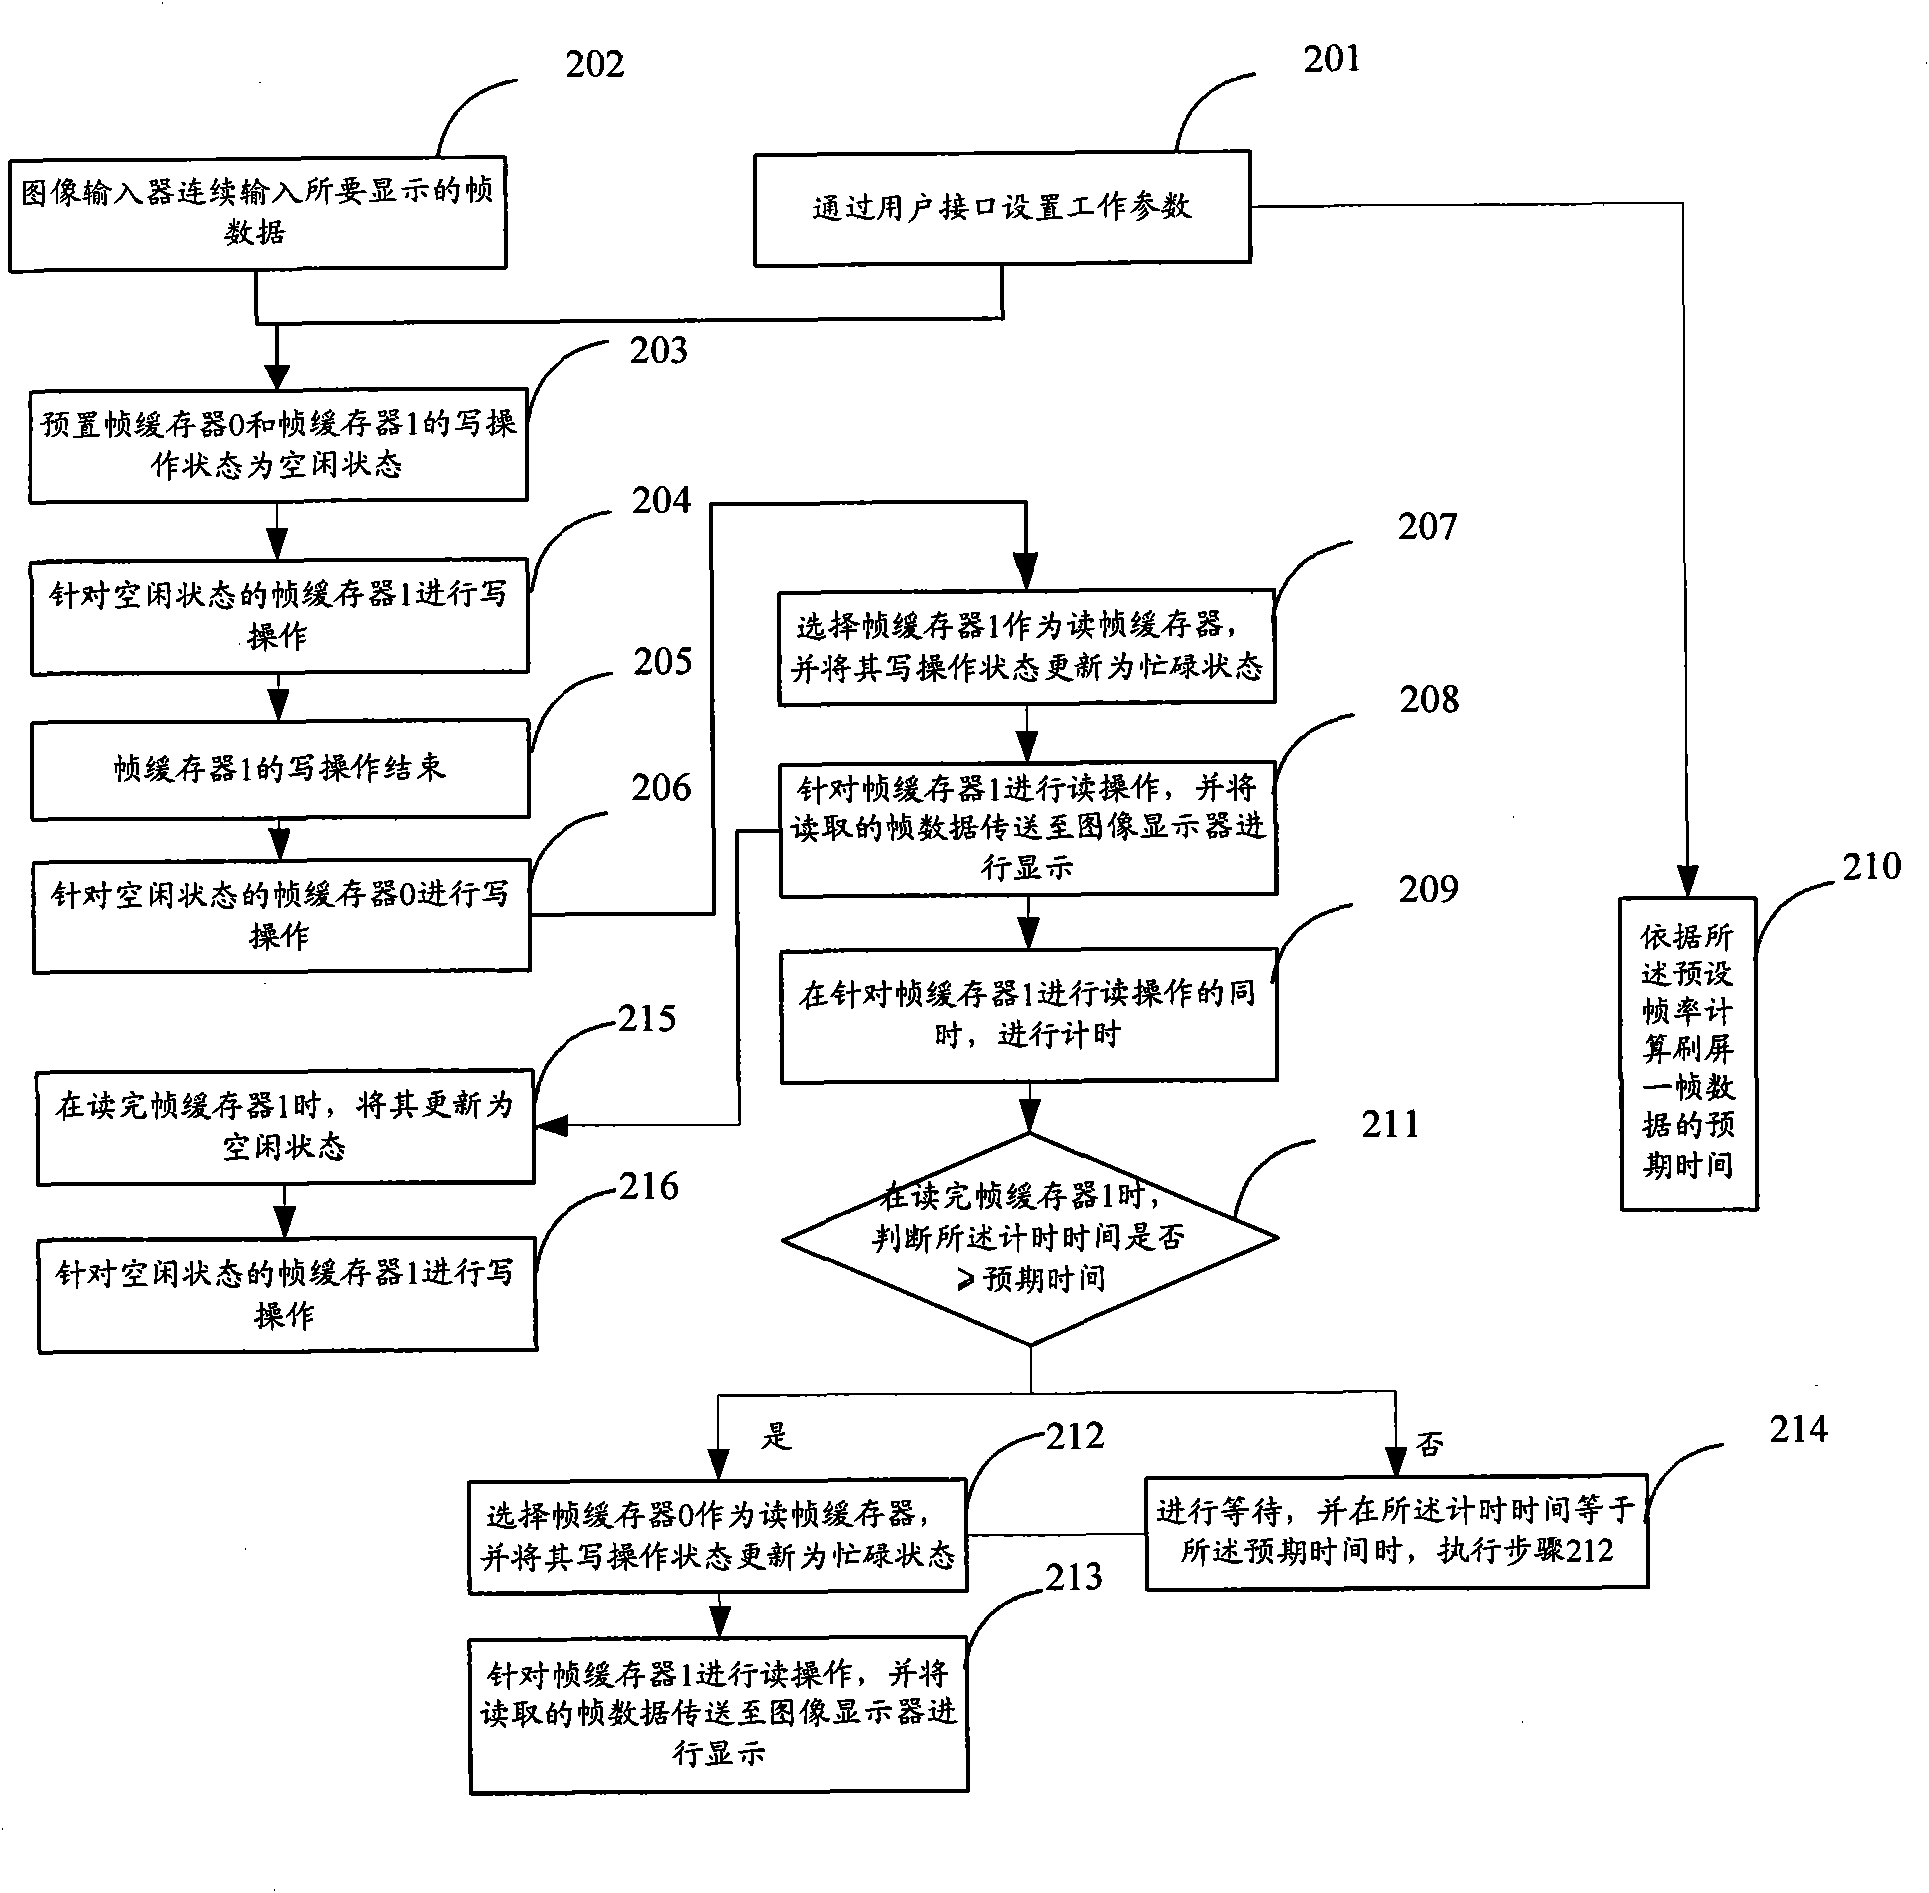 Screen refreshing method according to preset frame rate and device